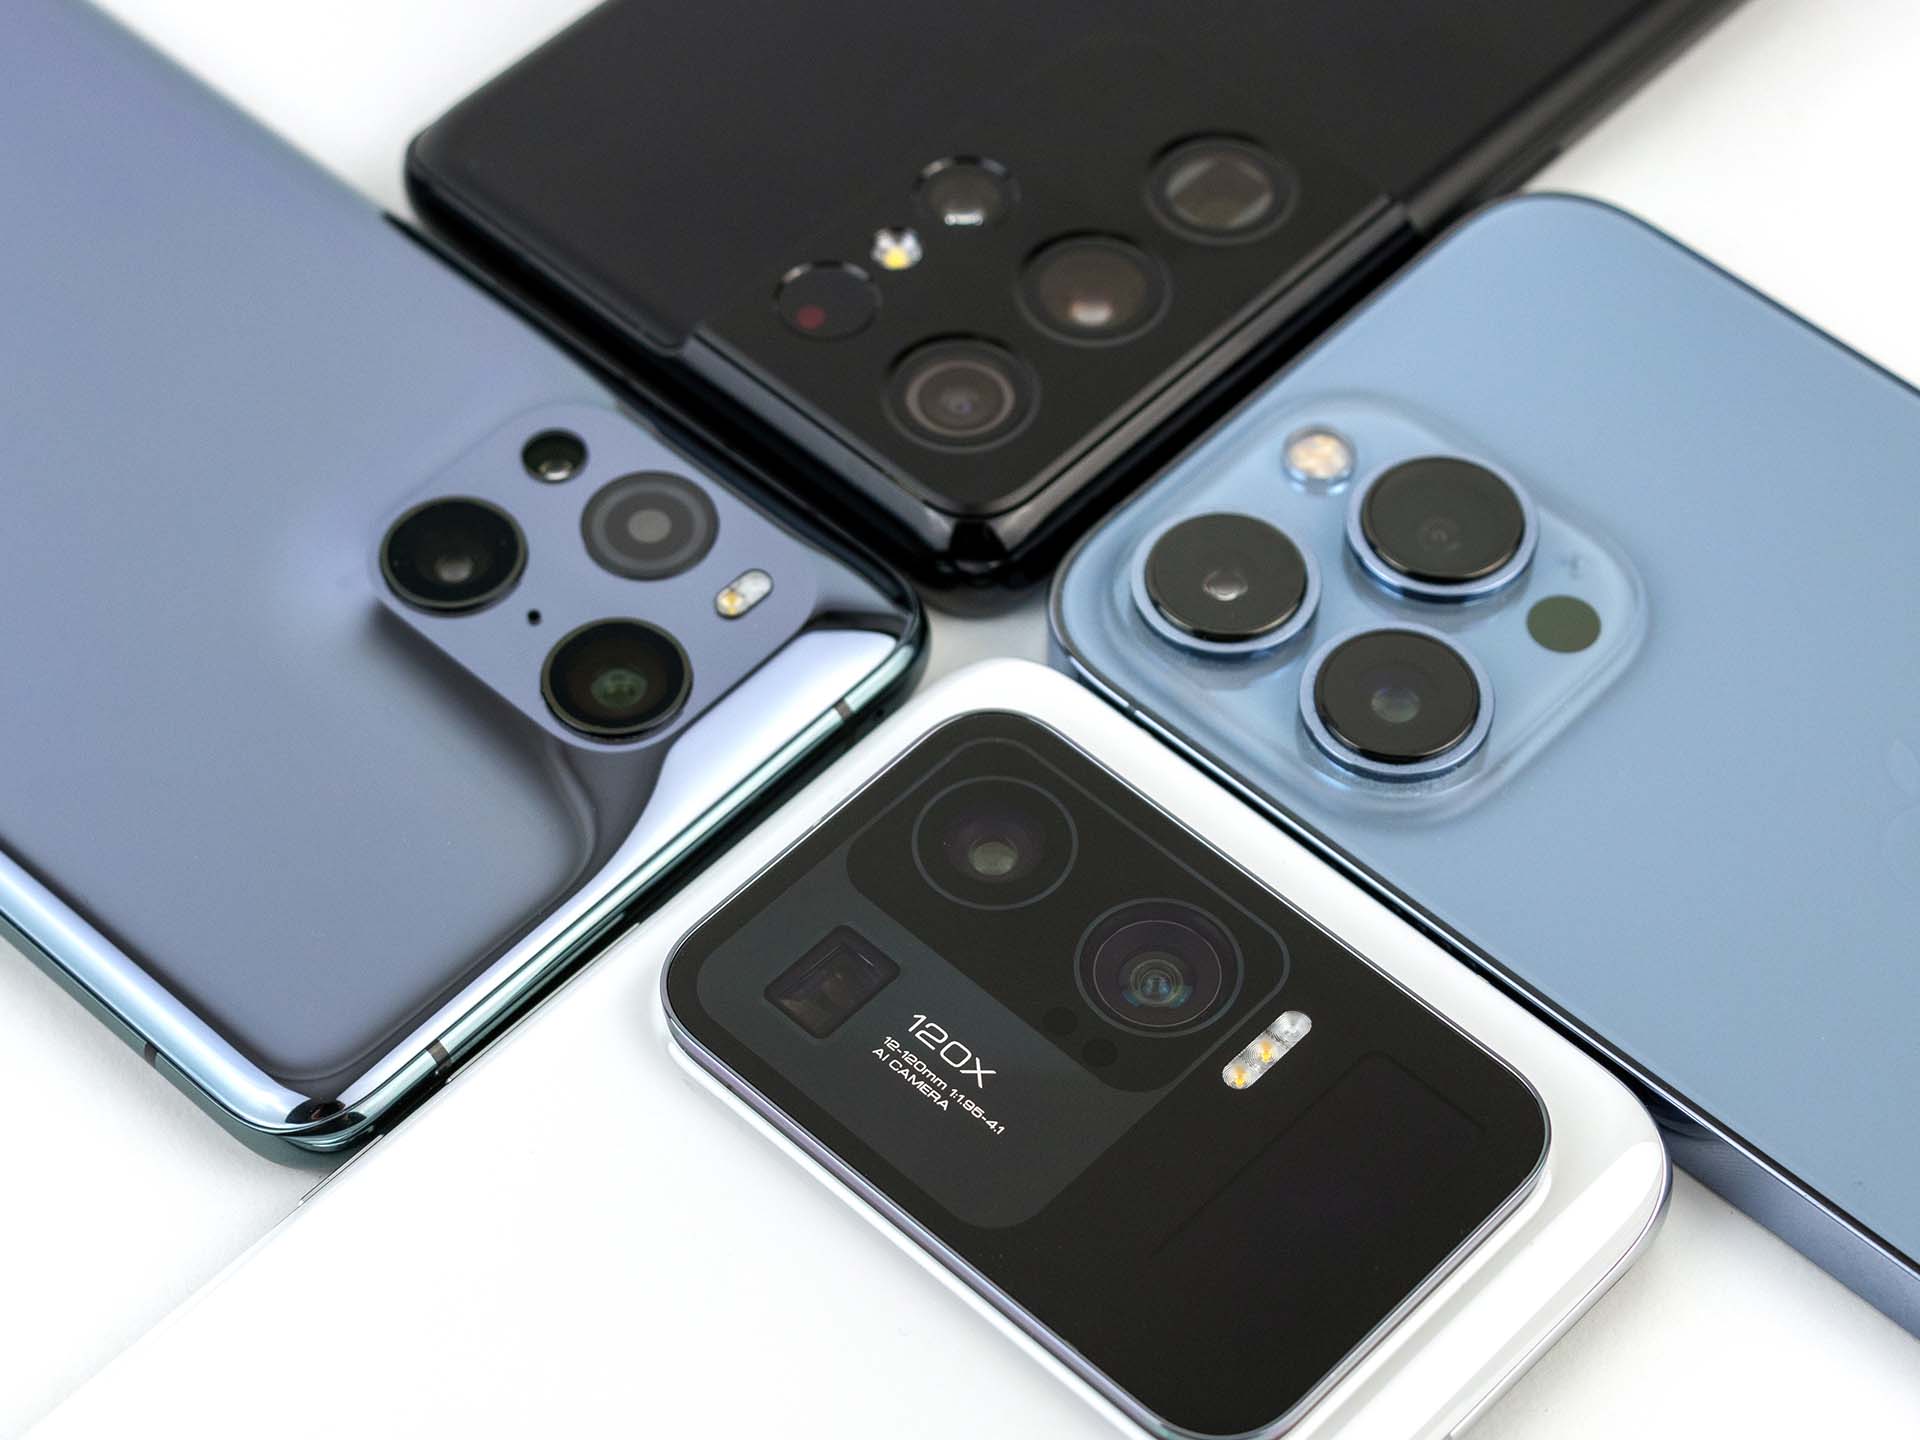 Camera comparison These highend smartphones take the best photos